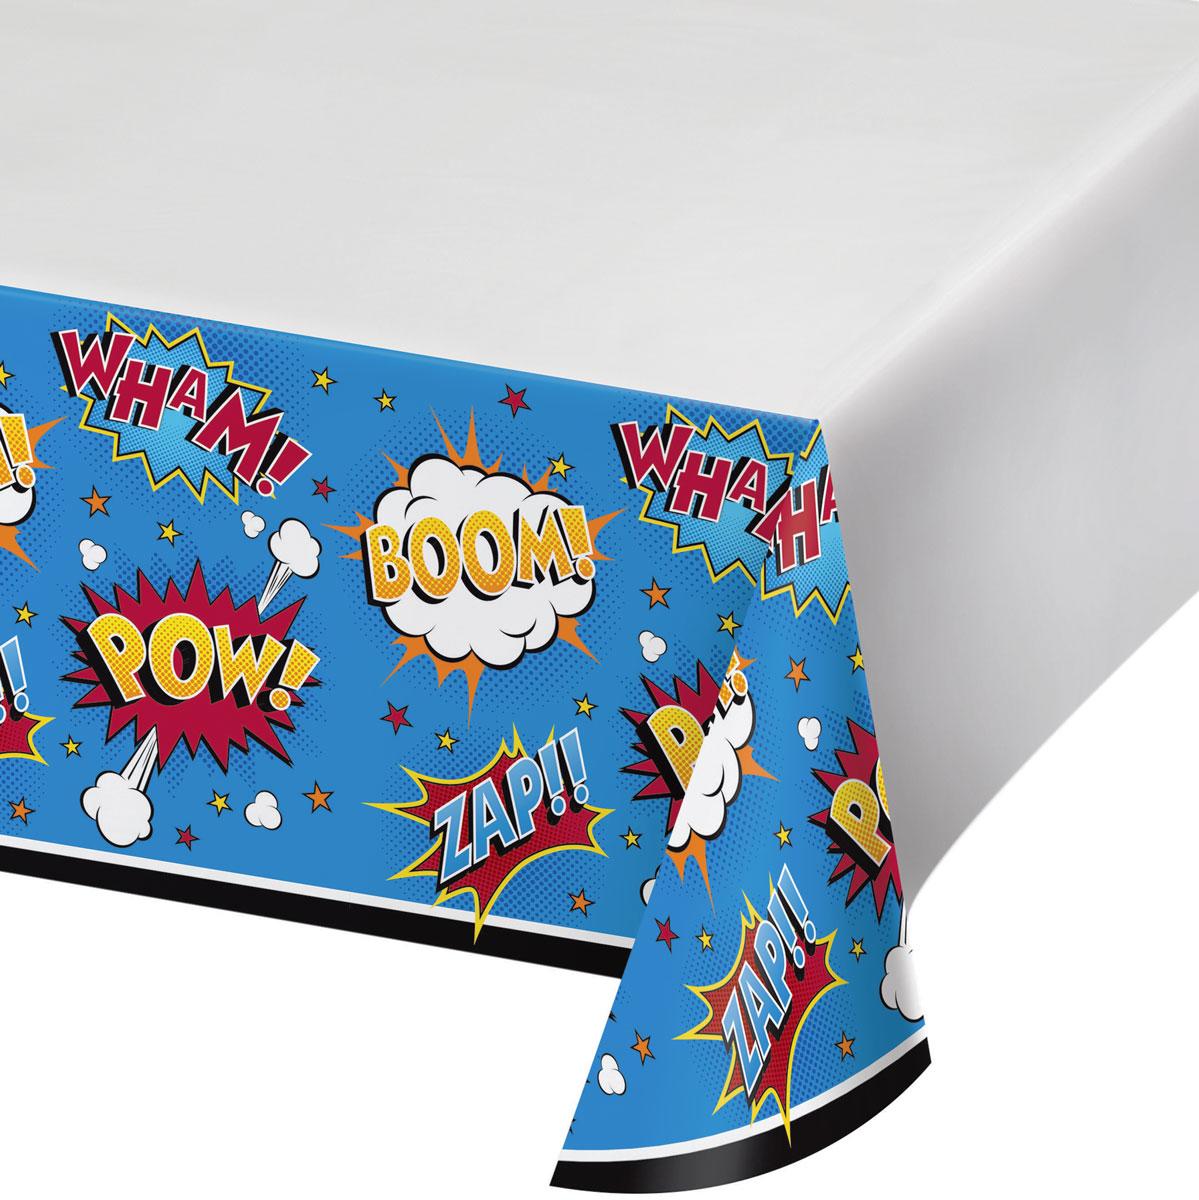 Superhero Slogans Tablecover measuring 48" x 88" in Plastic by Creative Party 324834 available here at Karnival Costumes online party shop